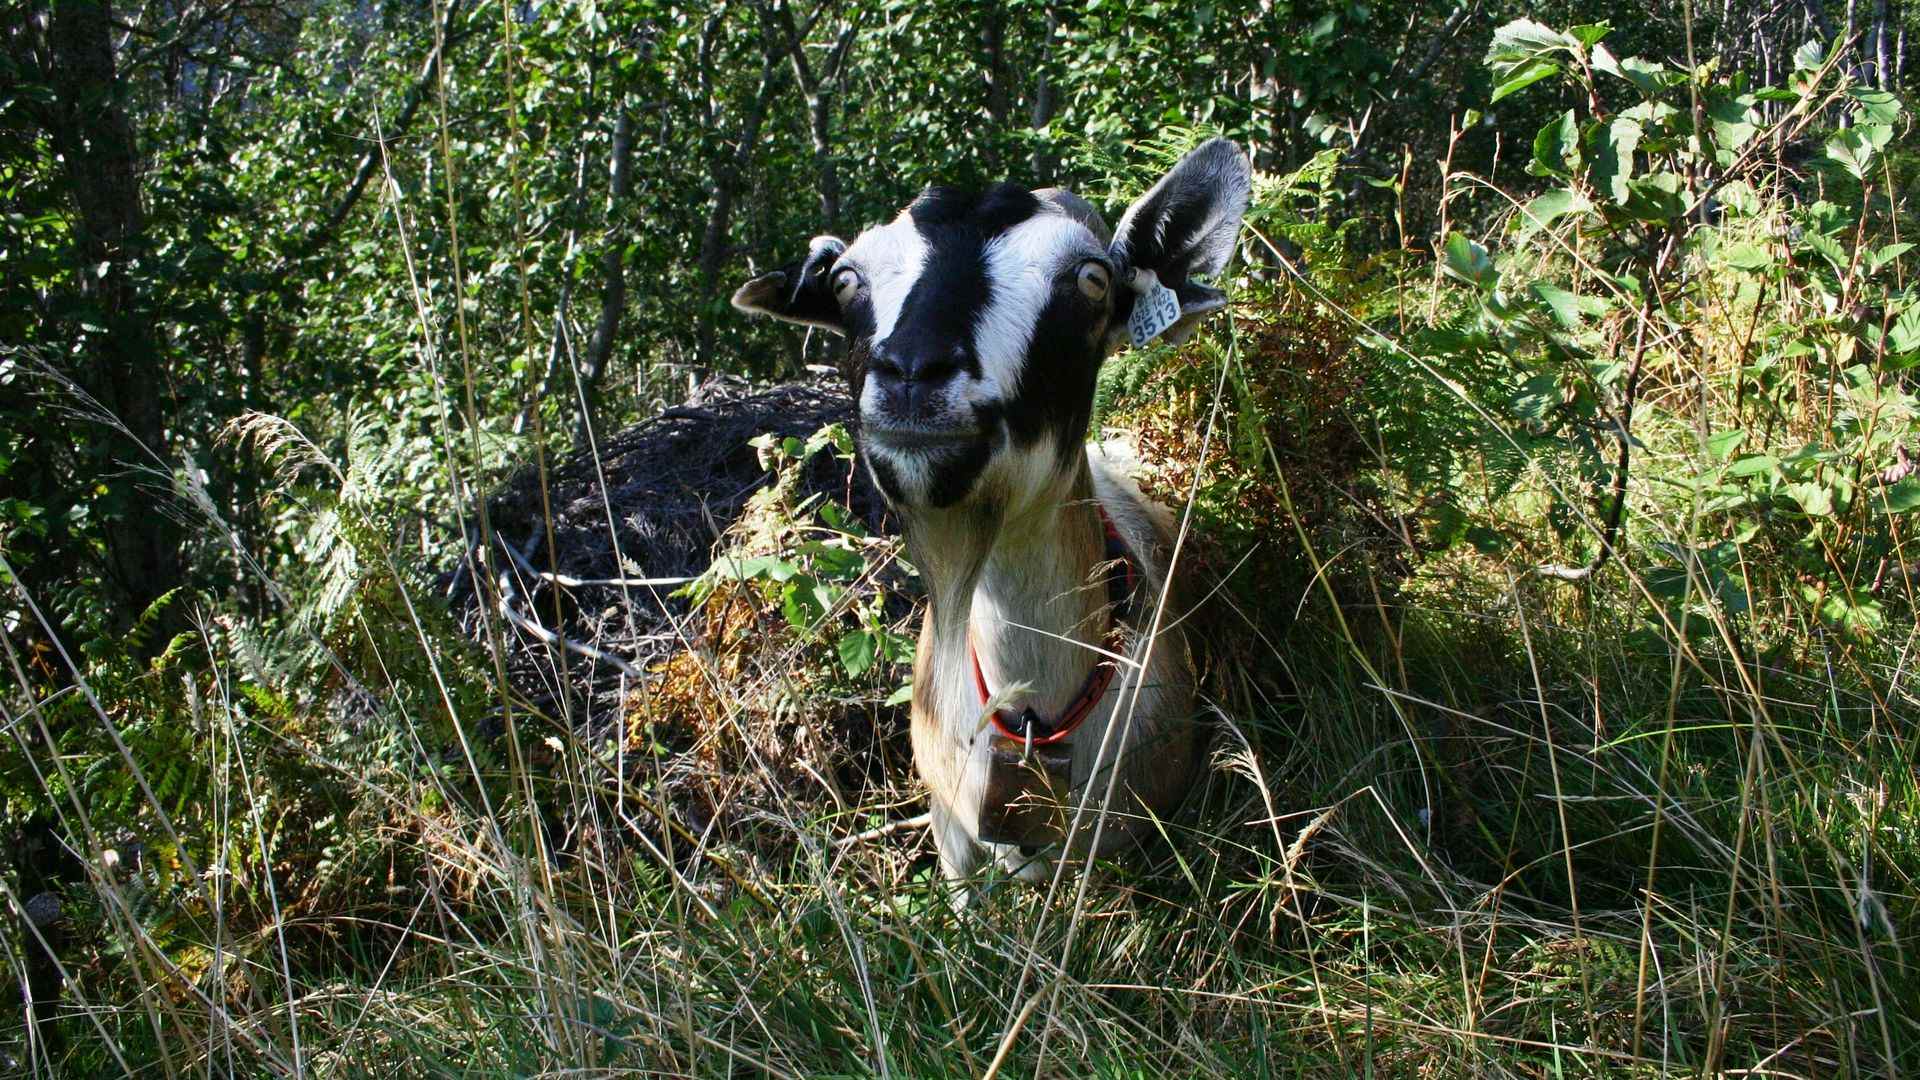 A goat in Geirangerfjord